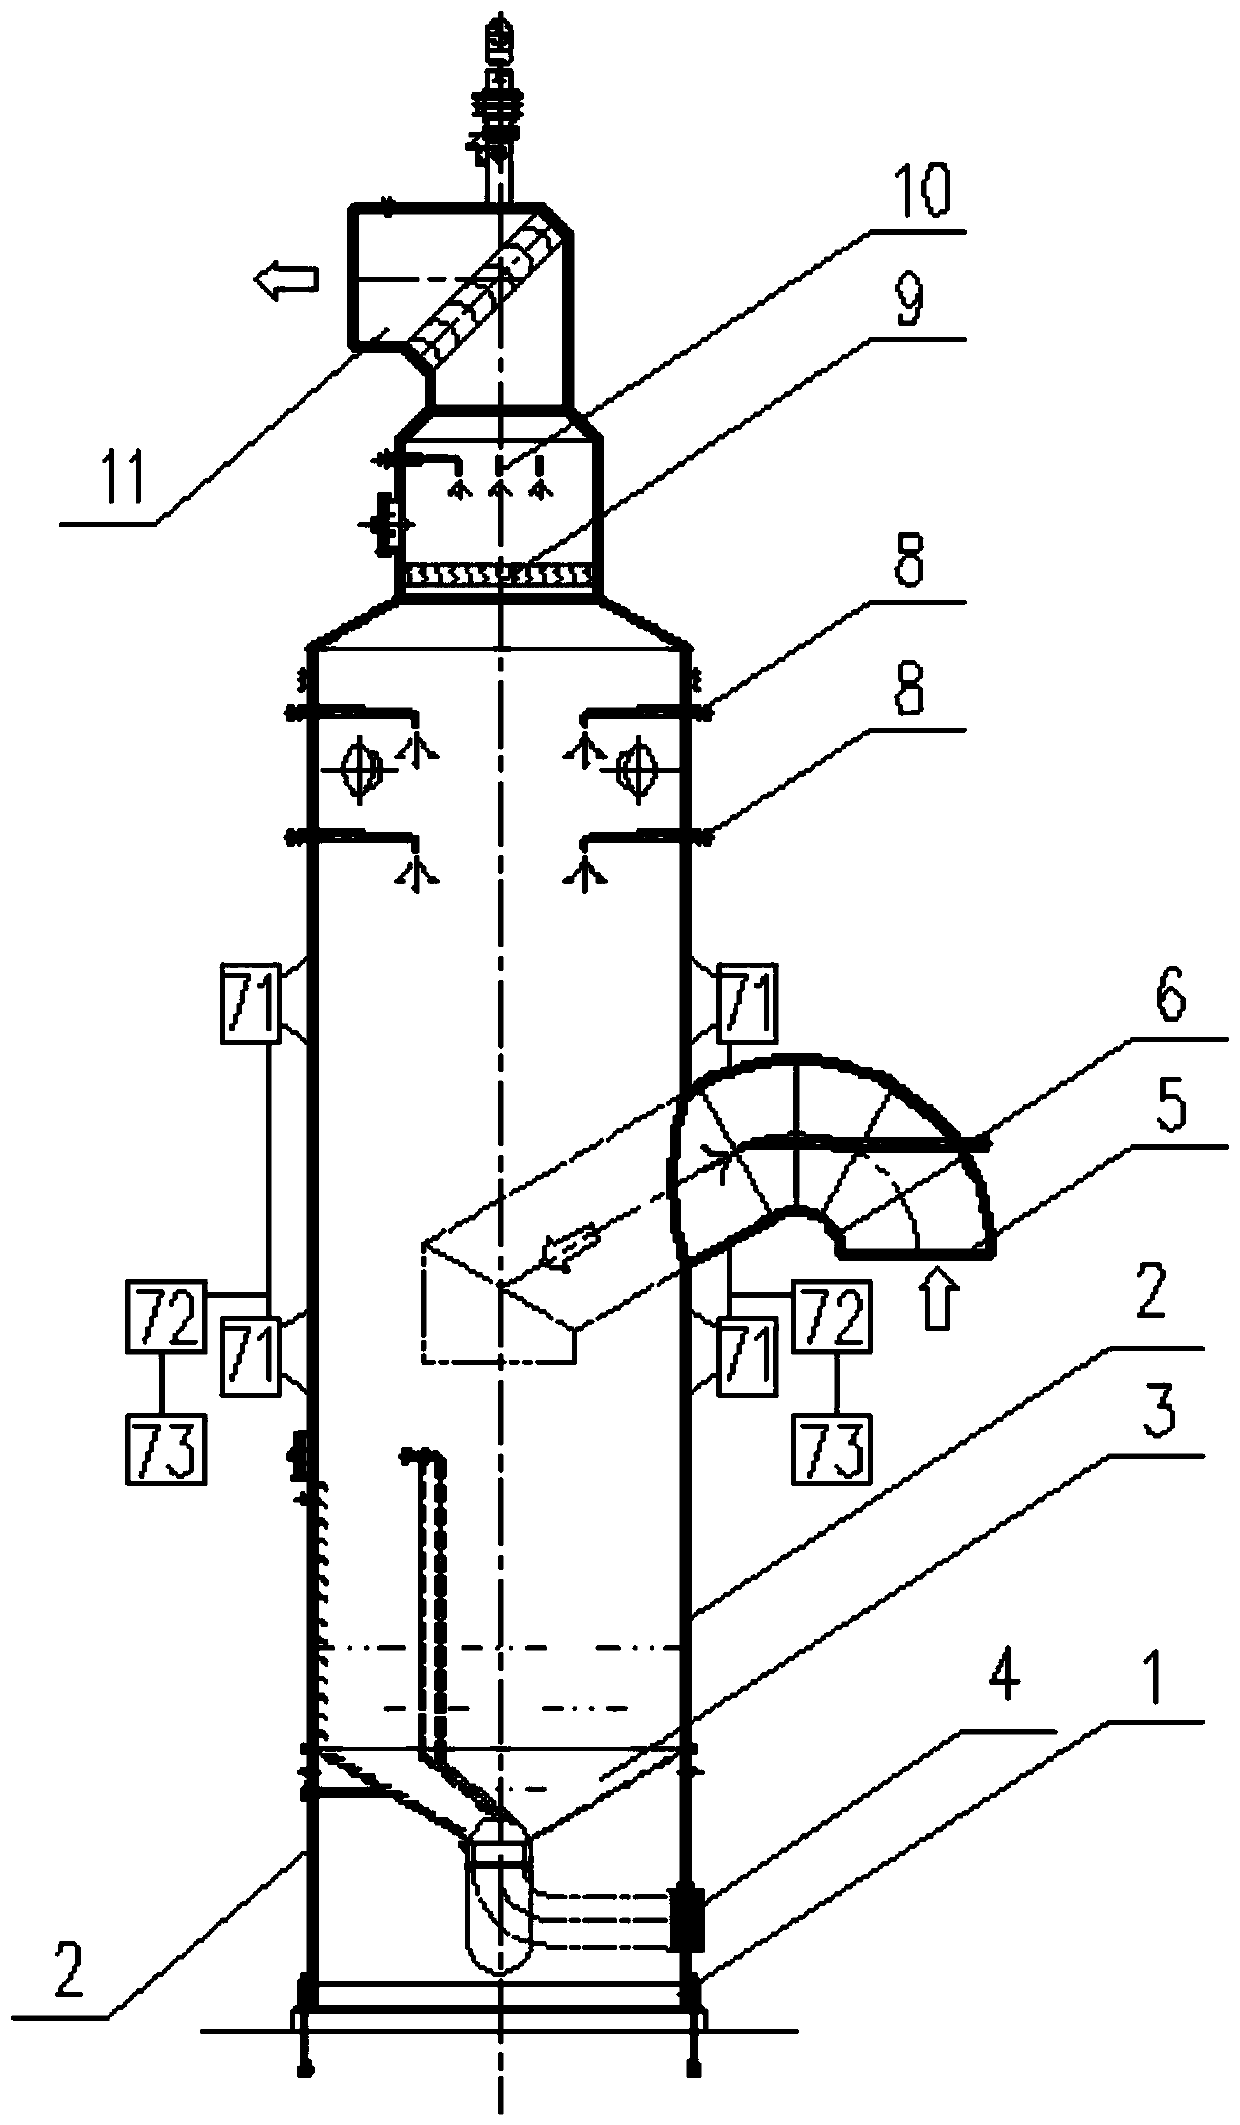 Sound wave agglomeration-based dust removal and ultralow emission device applicable to converter gas